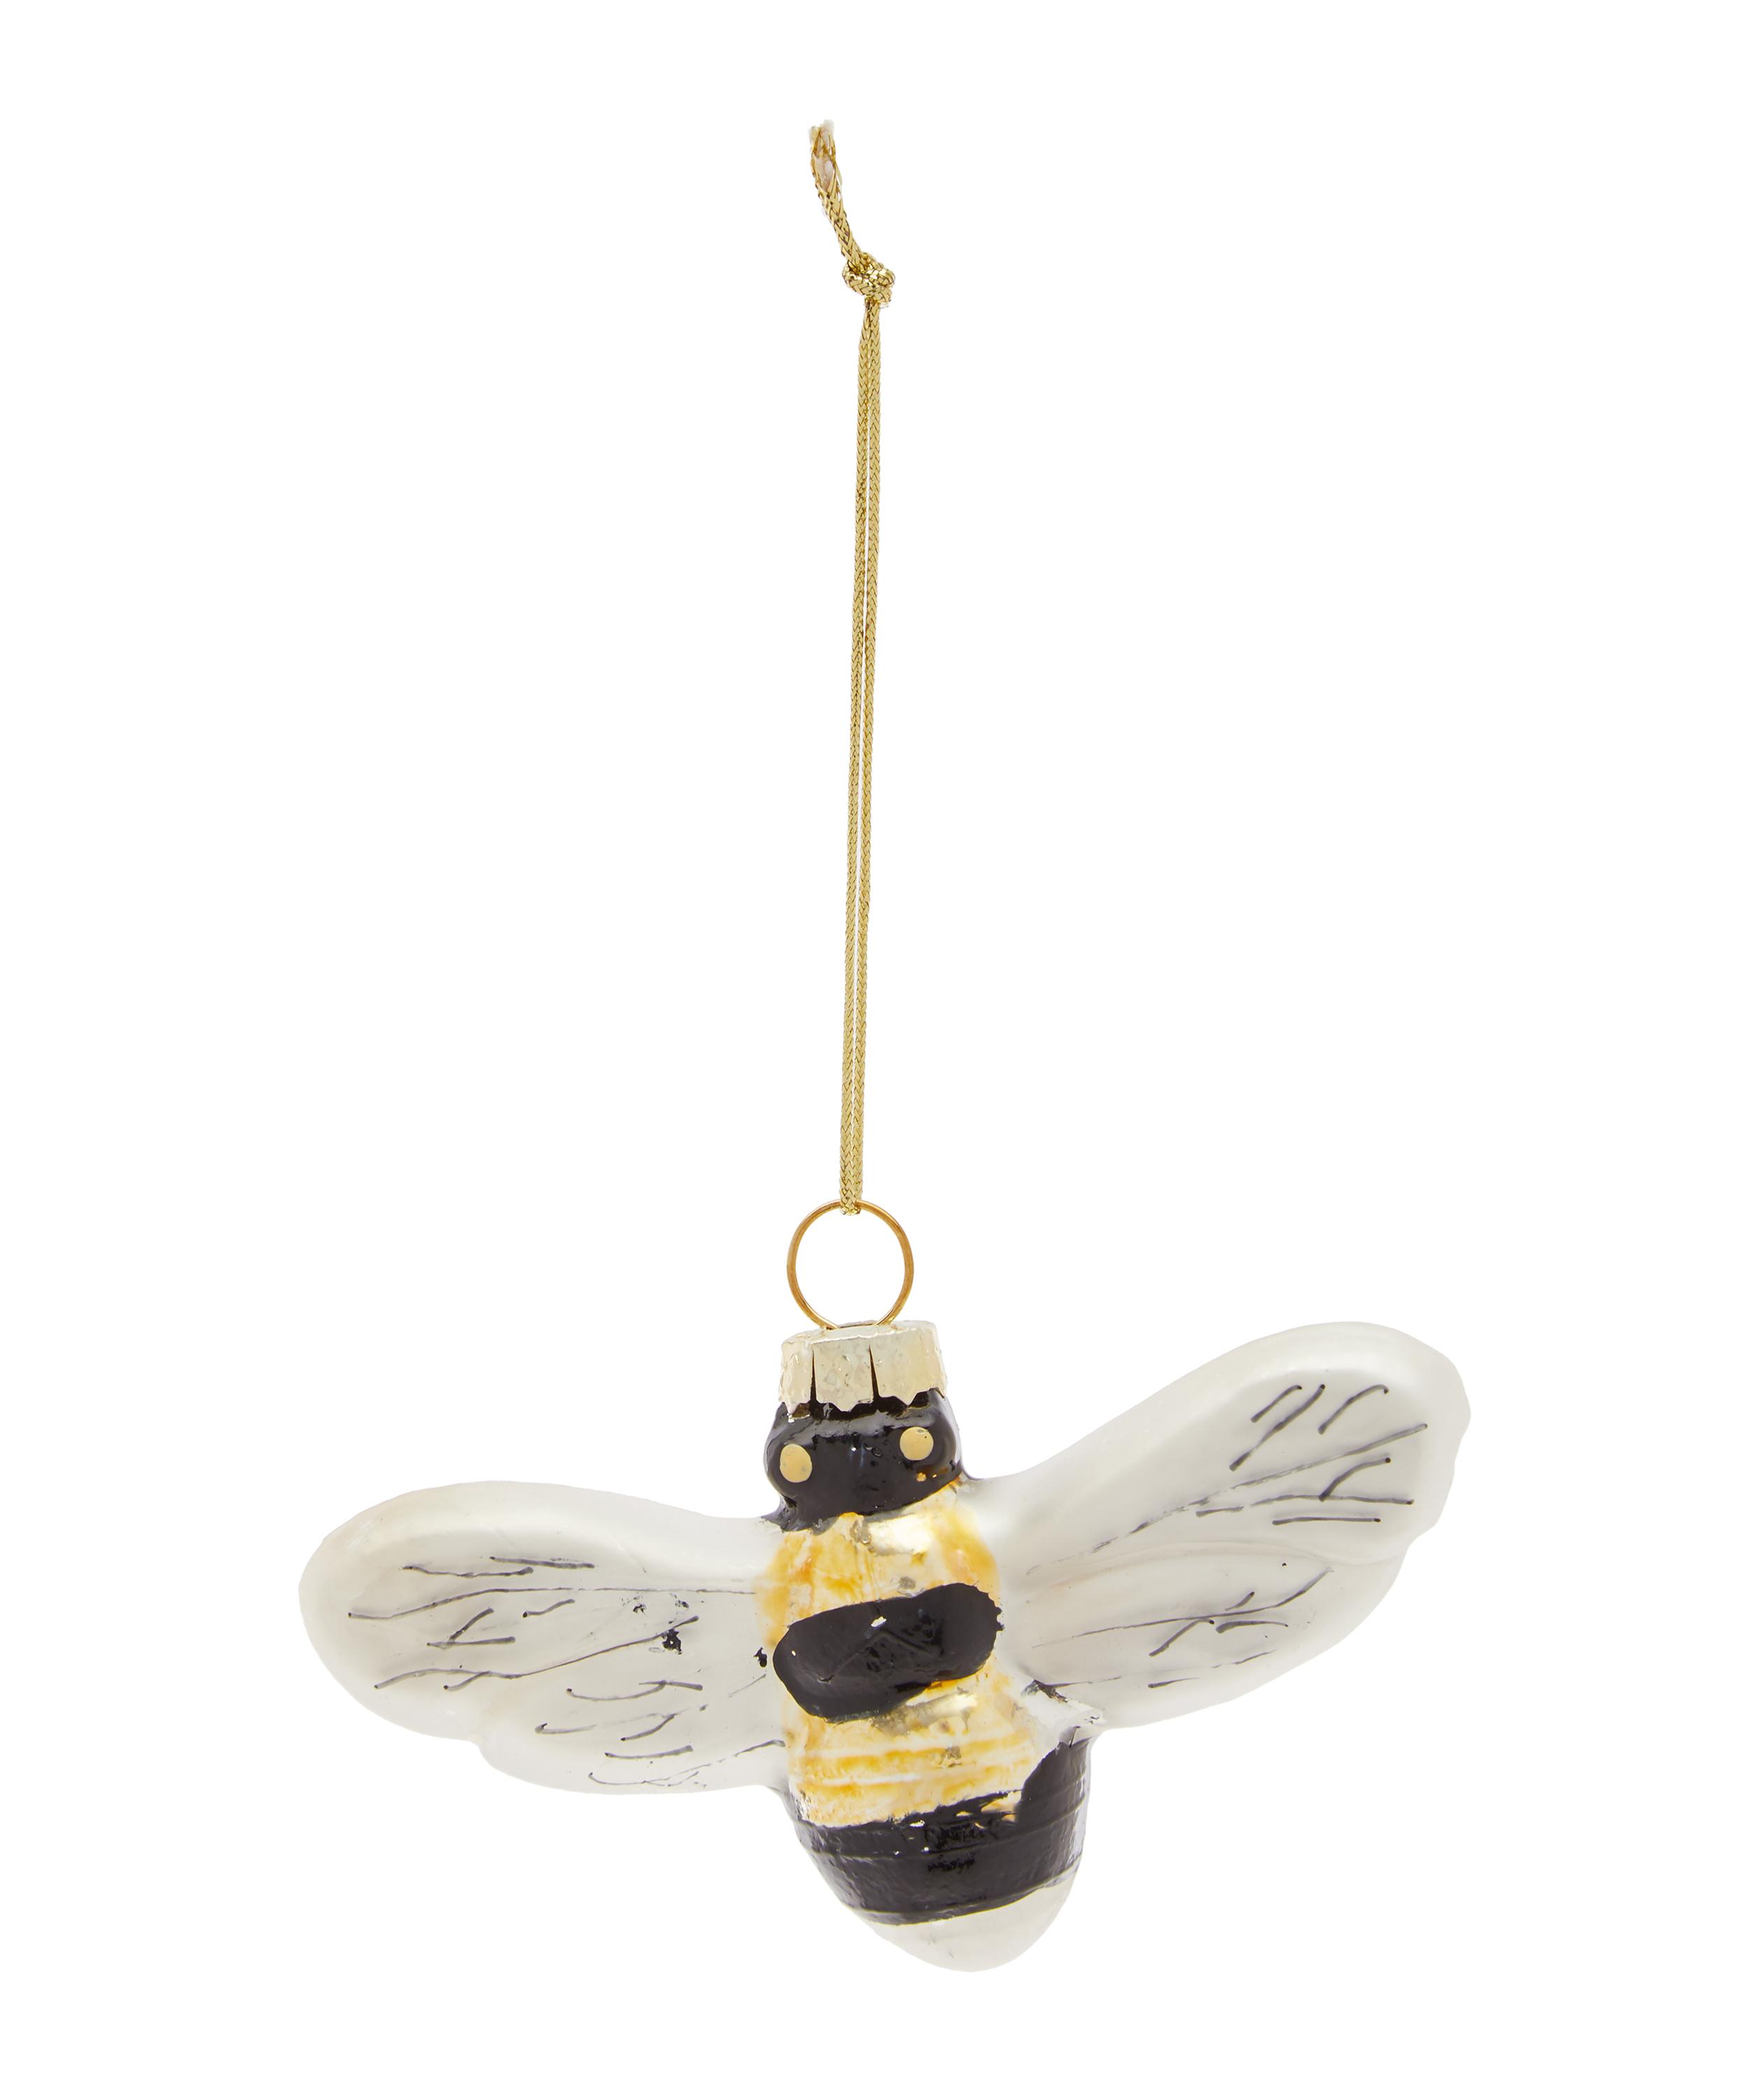 Painted Glass Bumble Bee Ornament Liberty London